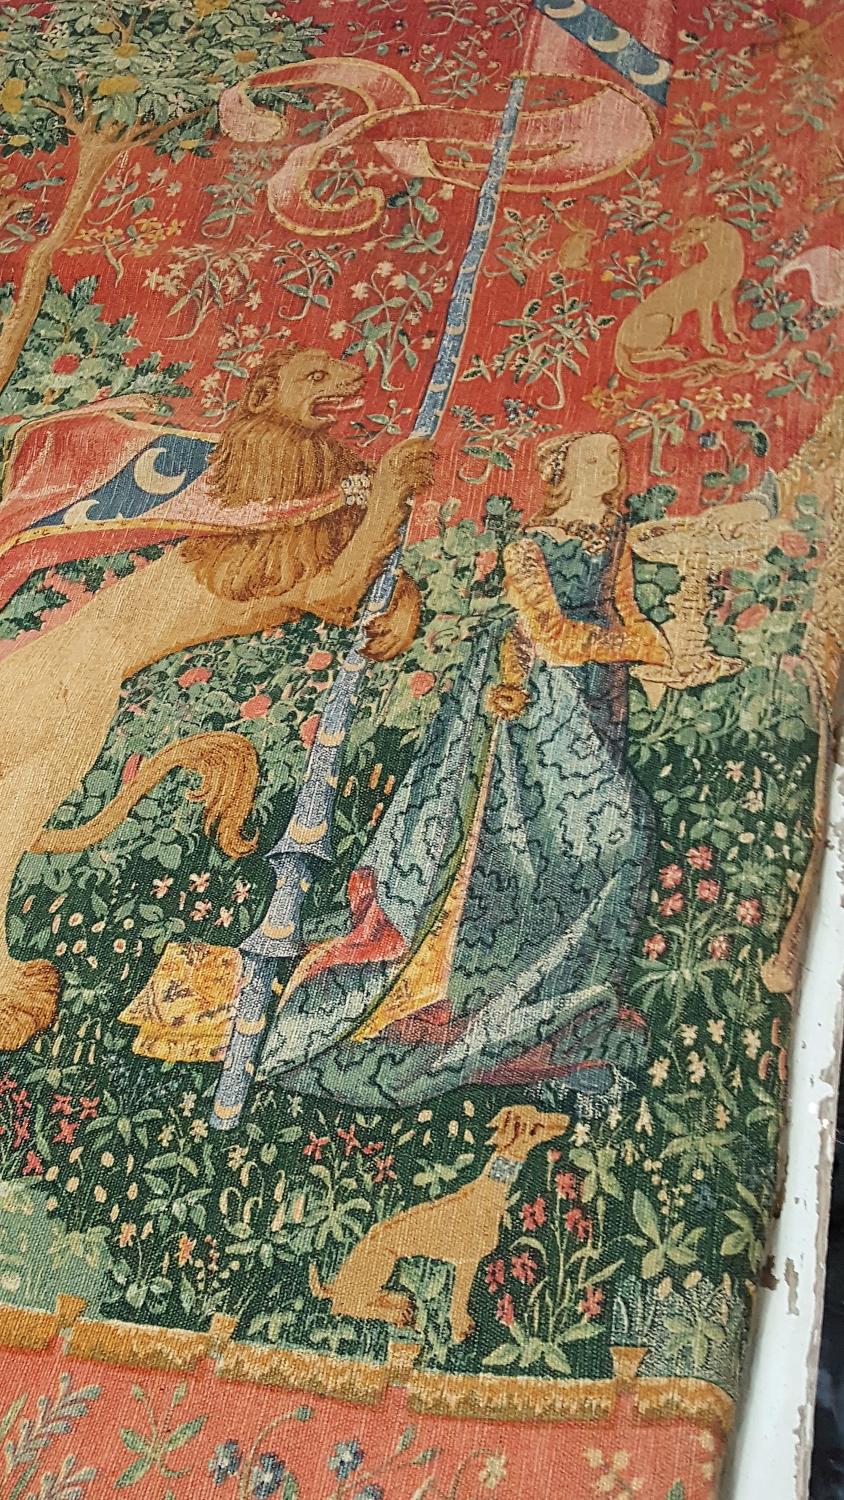 Cluny Tapestry The Lady and the Unicorn